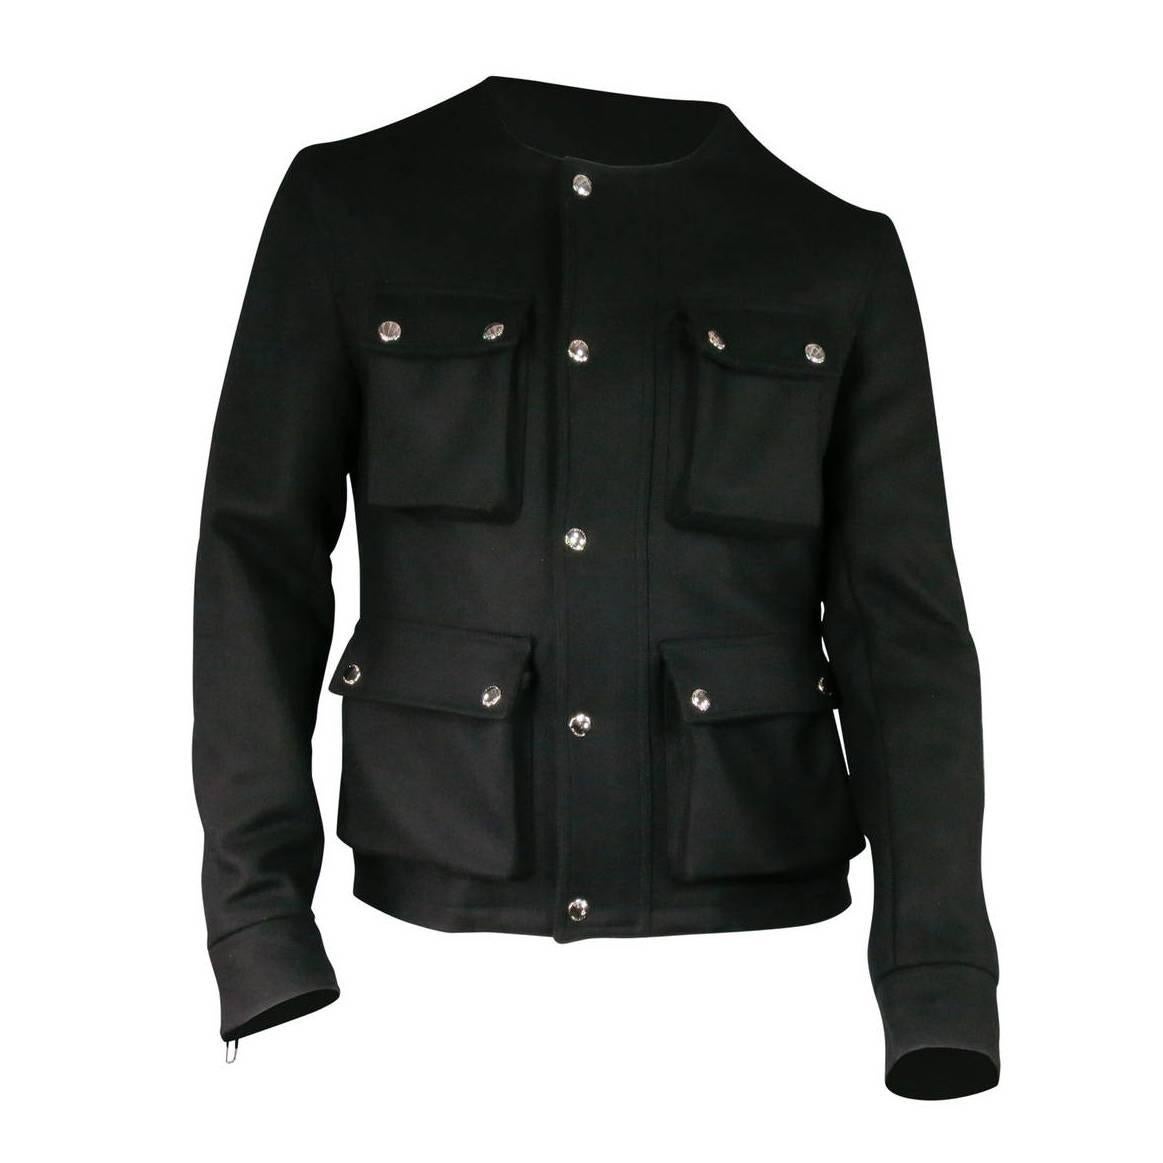 2013's GIVENCHY Men's 38 Wool Blend Motorcycle Black Jacket